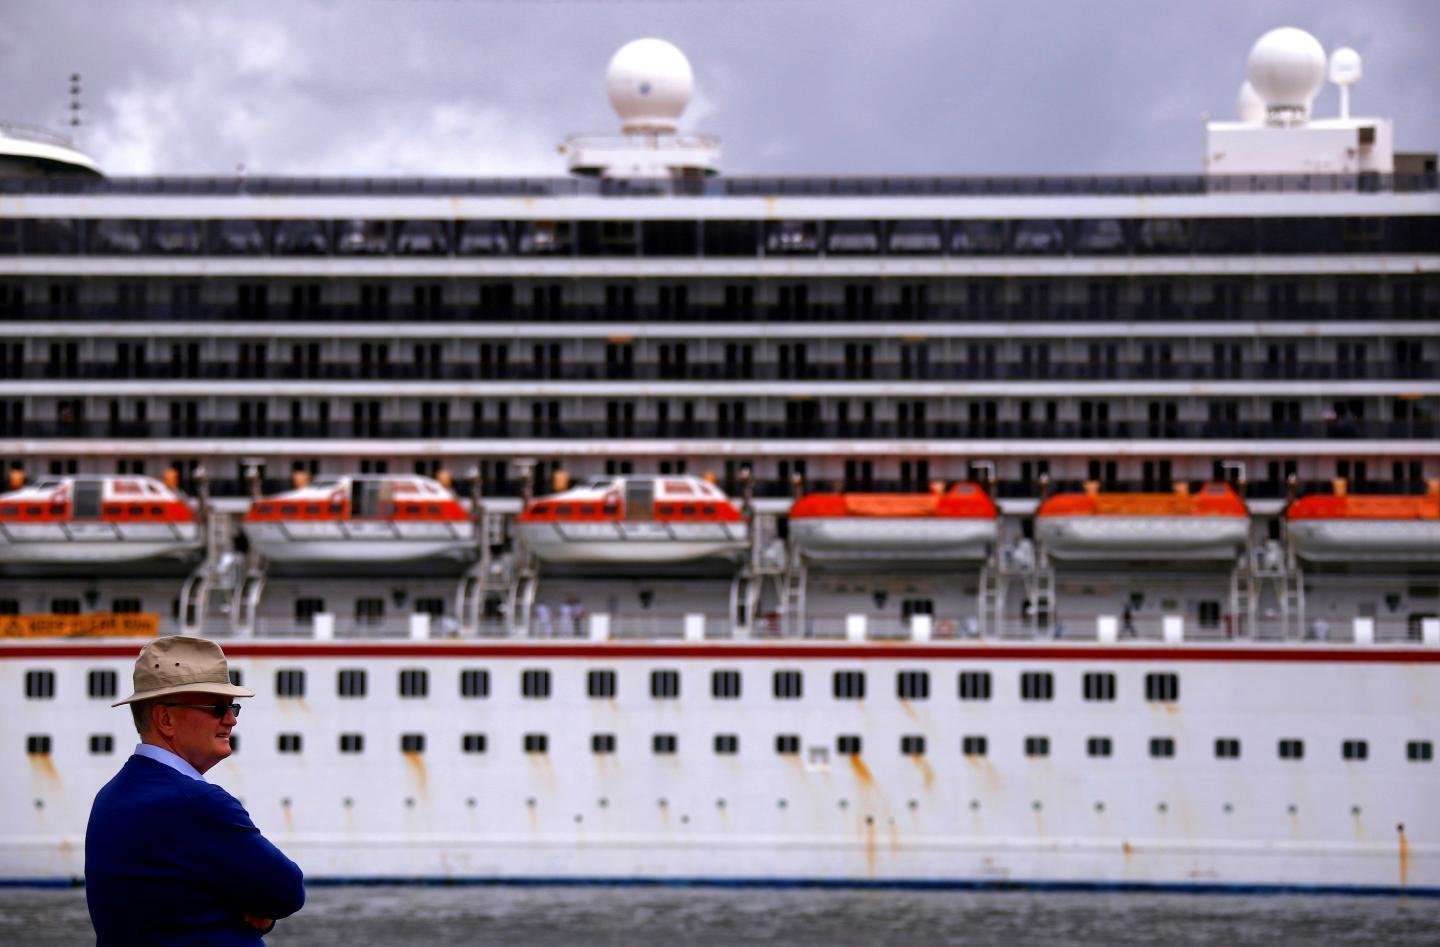 image for Cruise Ship Refunds Passengers After 1,300 Men Took Over and Turned It Into a Giant Burlesque Show